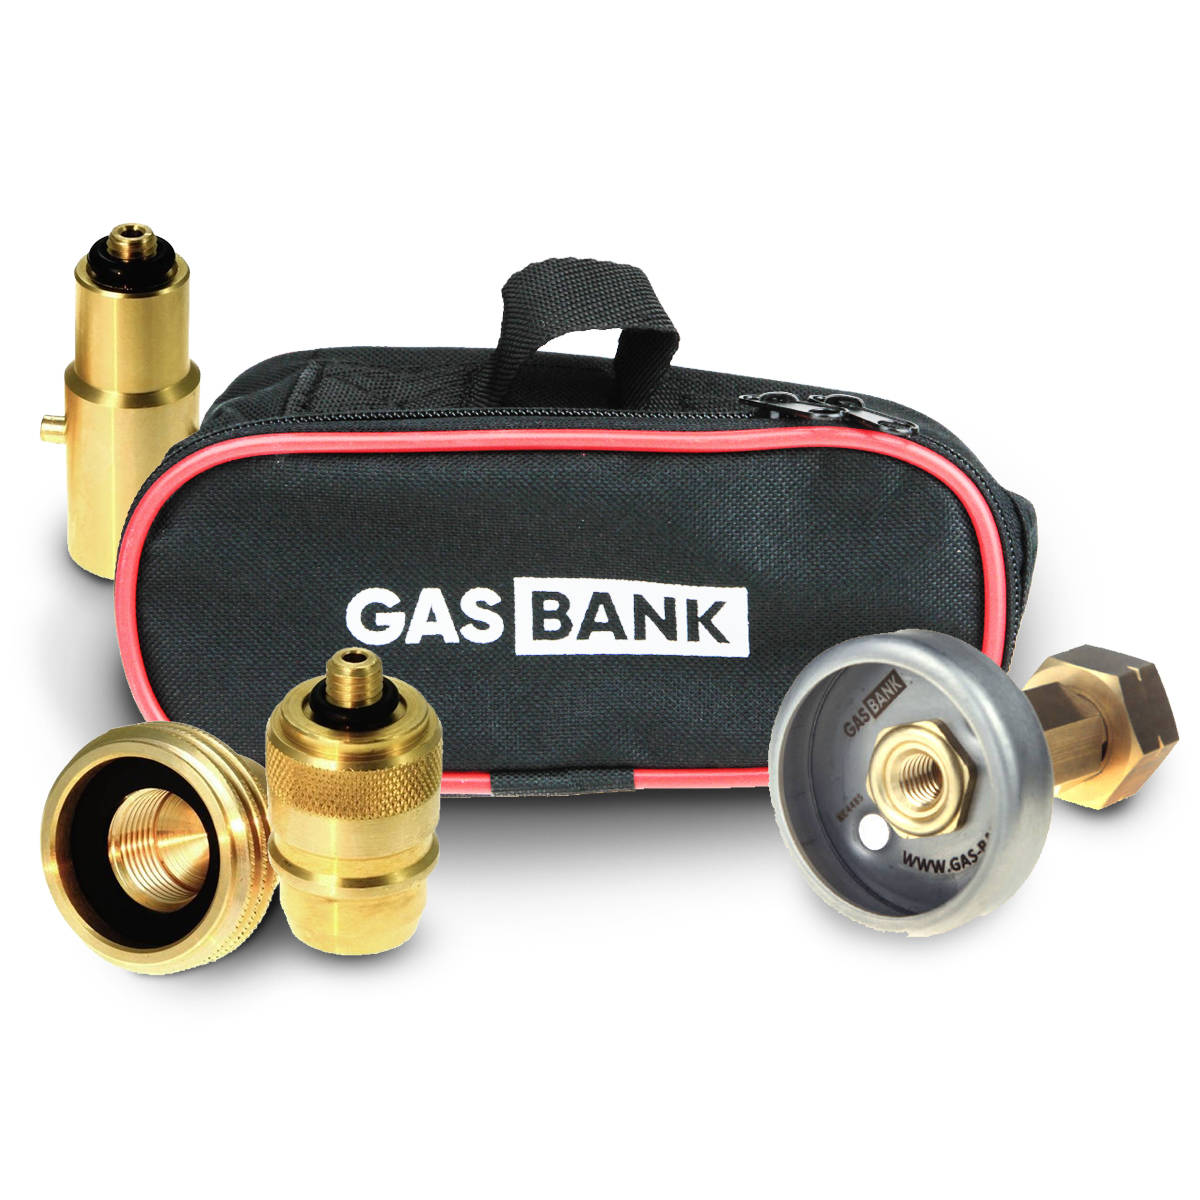 https://carbonzorro.com/eng_pl_Set-of-nozzles-for-refuelling-throughout-Europe-DIN-with-non-return-valve-in-a-special-case-1342_1.jpg